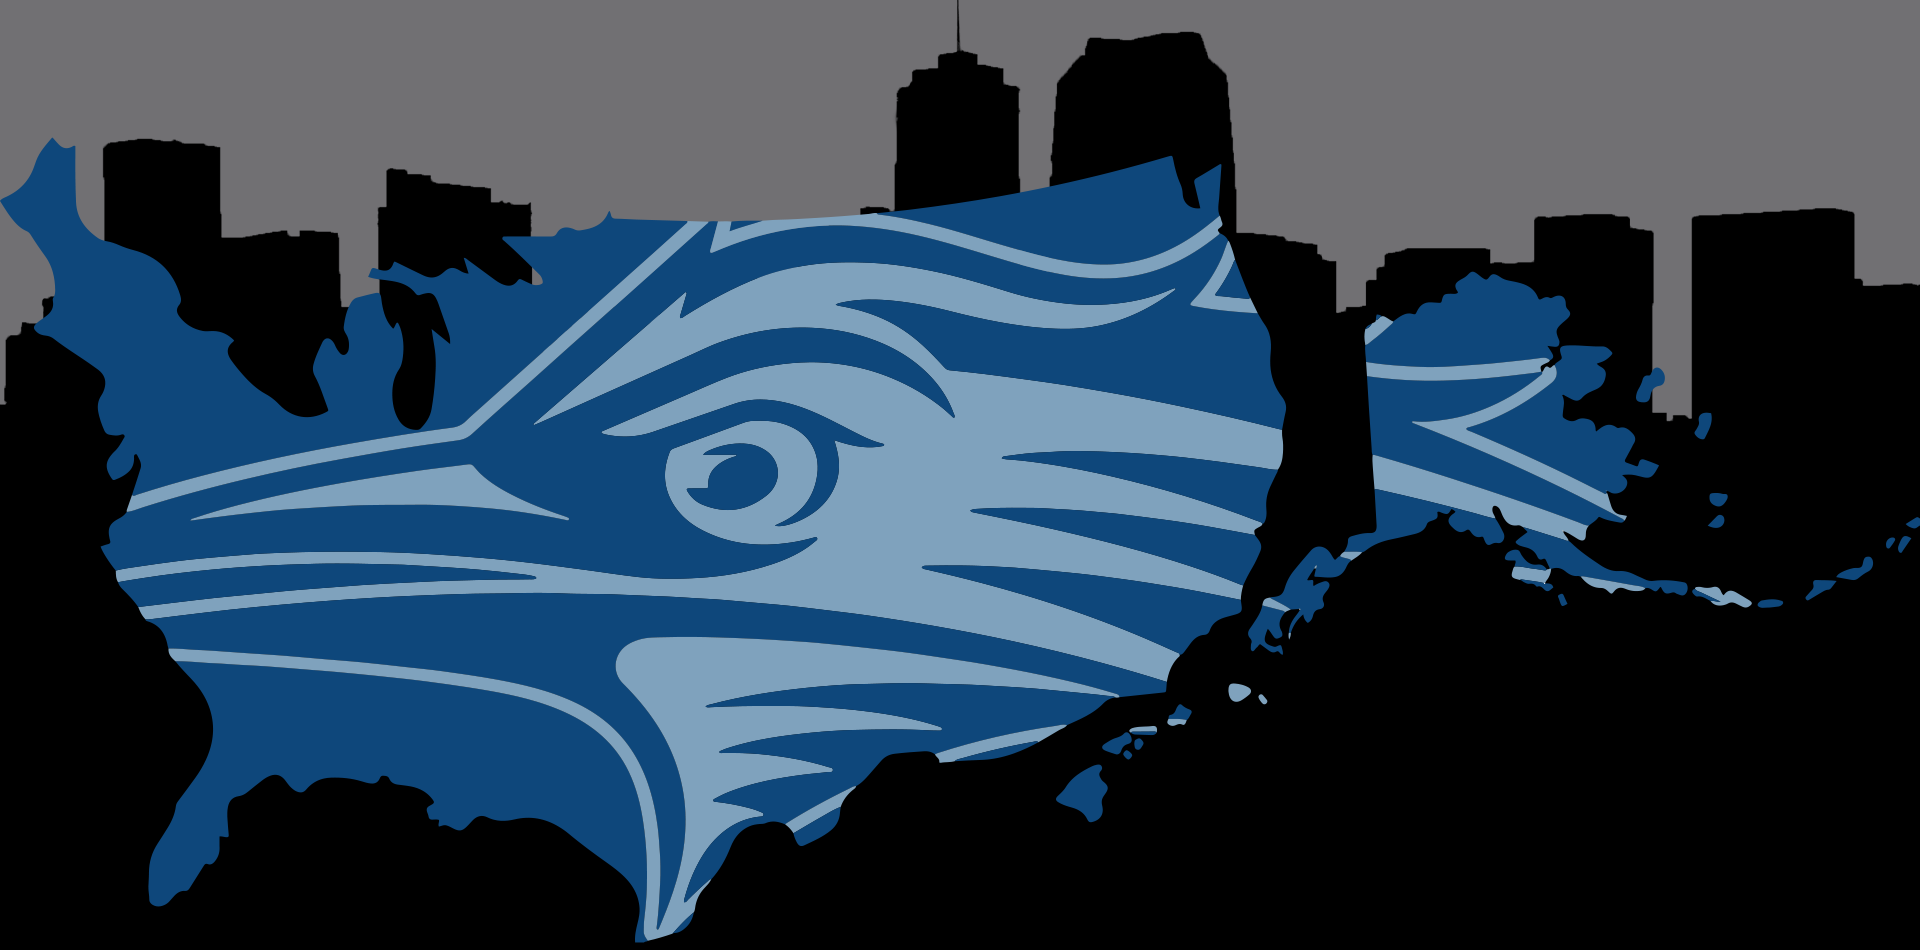 Geographical Alumni graphic with a birdhead over a map of the U.S. with the Denver skyline in the background